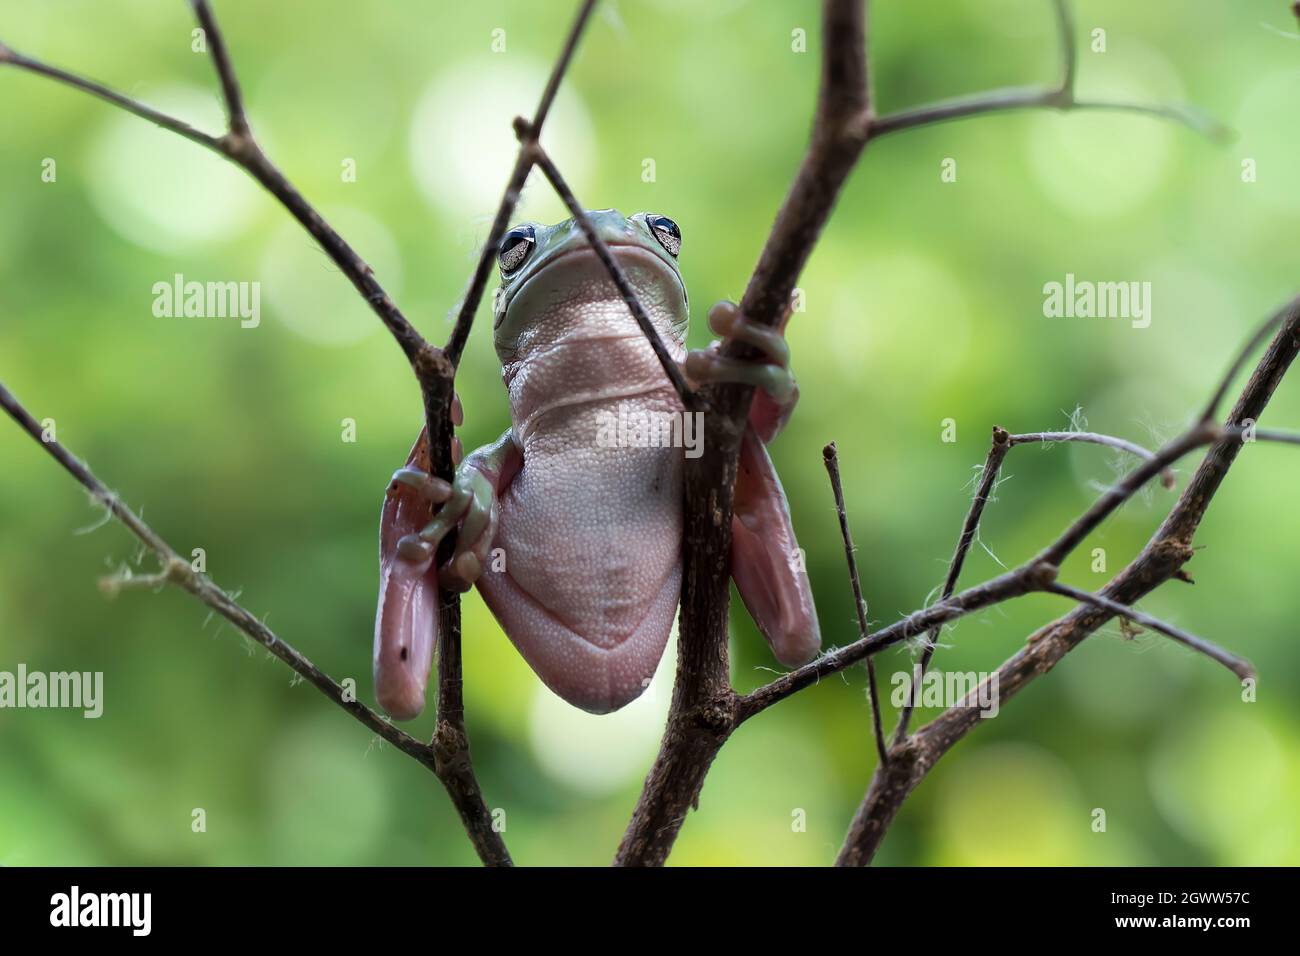 The Australian Green Tree Frog Or Dumpy Tree Frog, With Natural And Colorful Background. Stock Photo